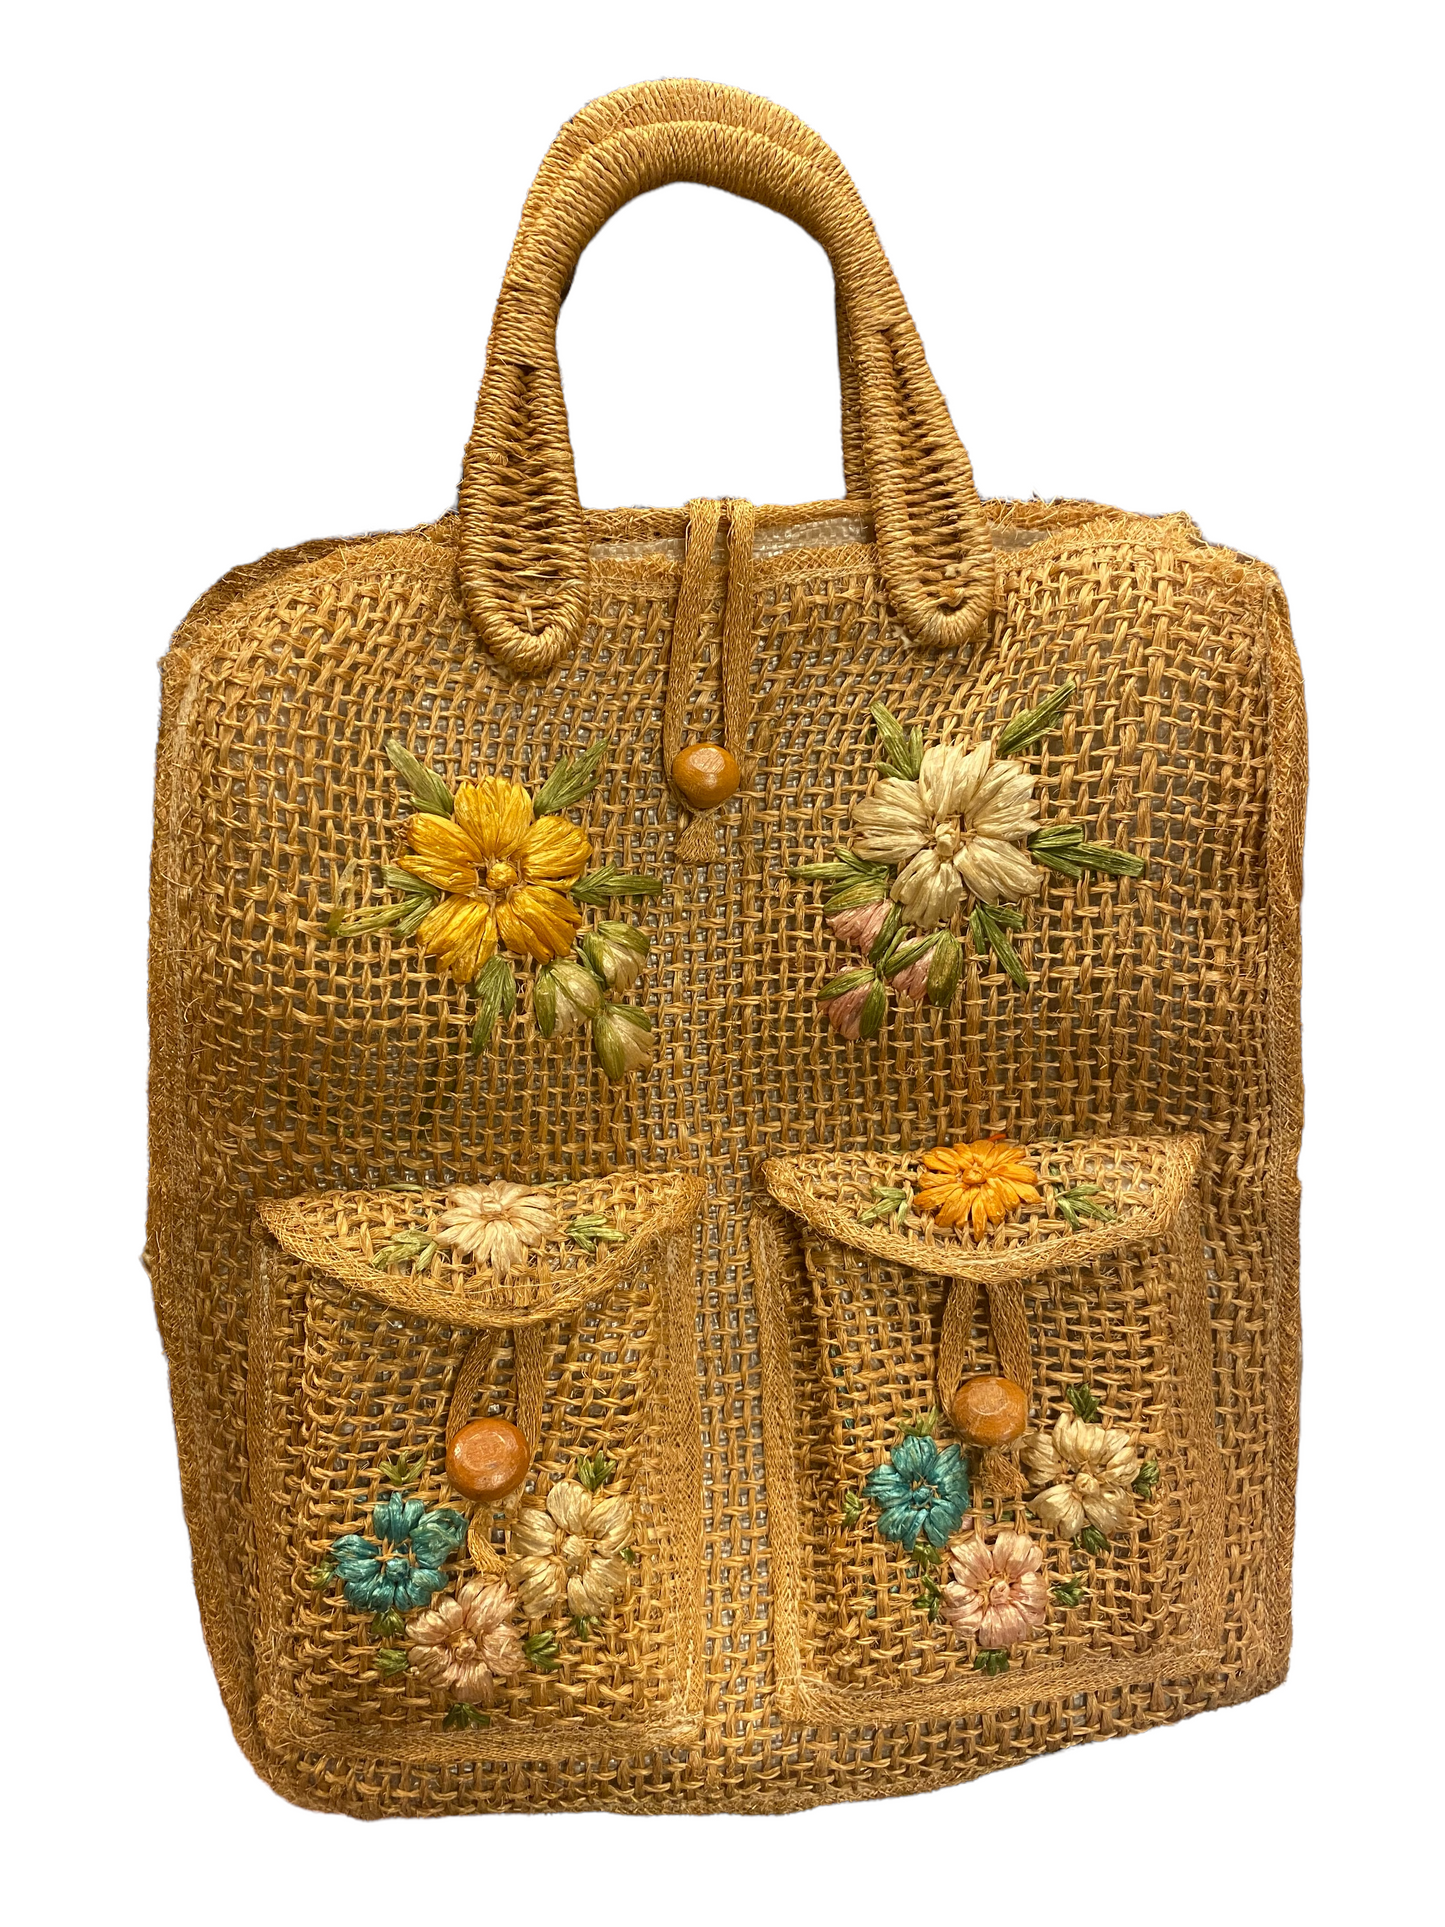 Vintage 1960s Rattan Floral Handbag Tote with Raffia Embroidery and Pockets Philippines